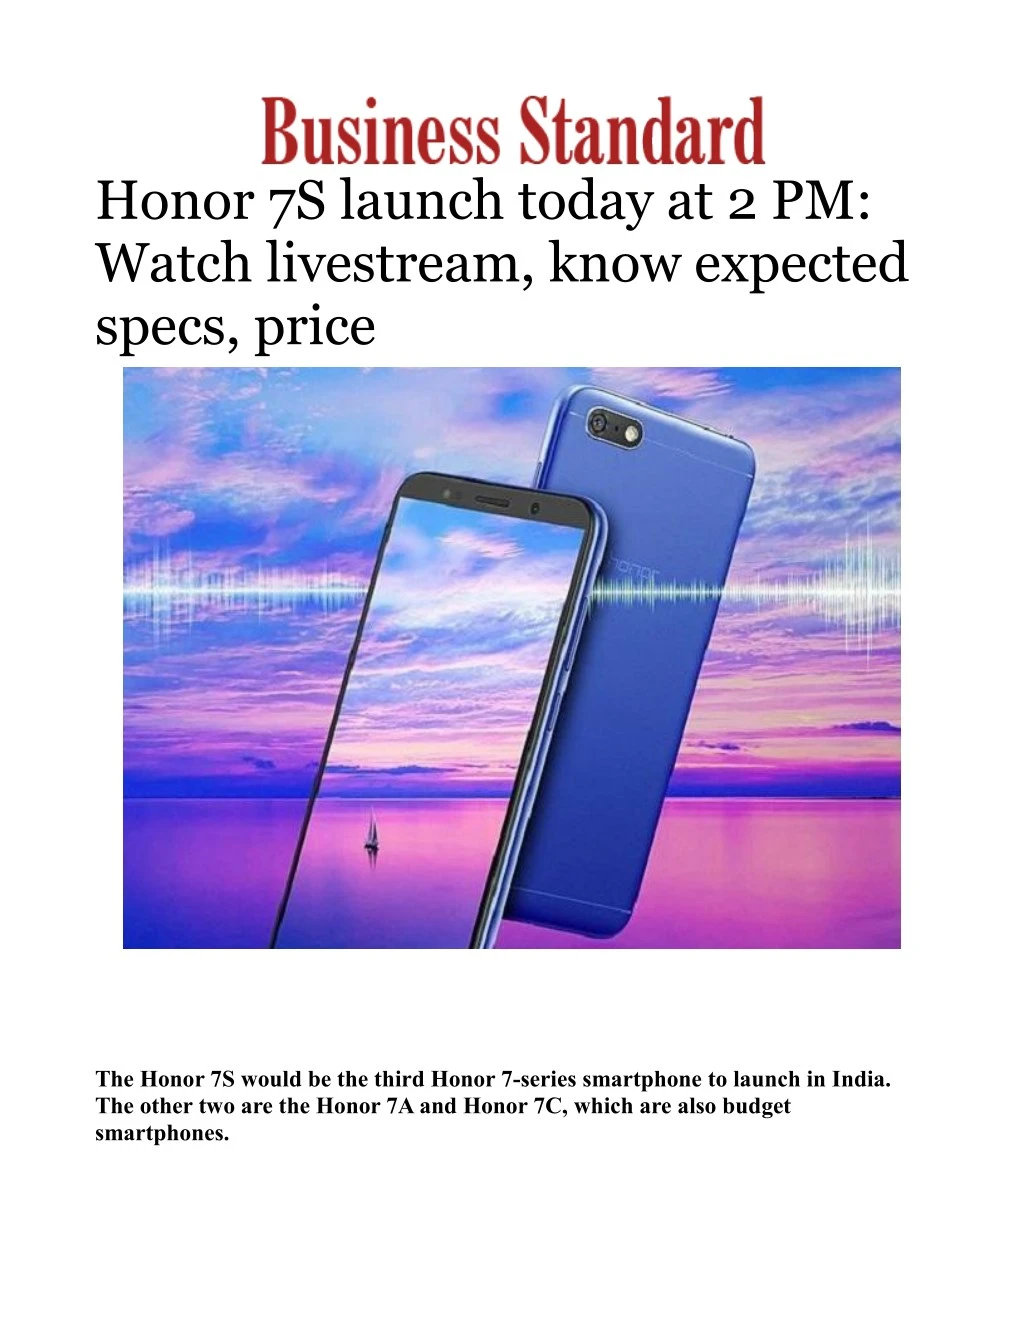 honor 7s launch today at 2 pm watch livestream